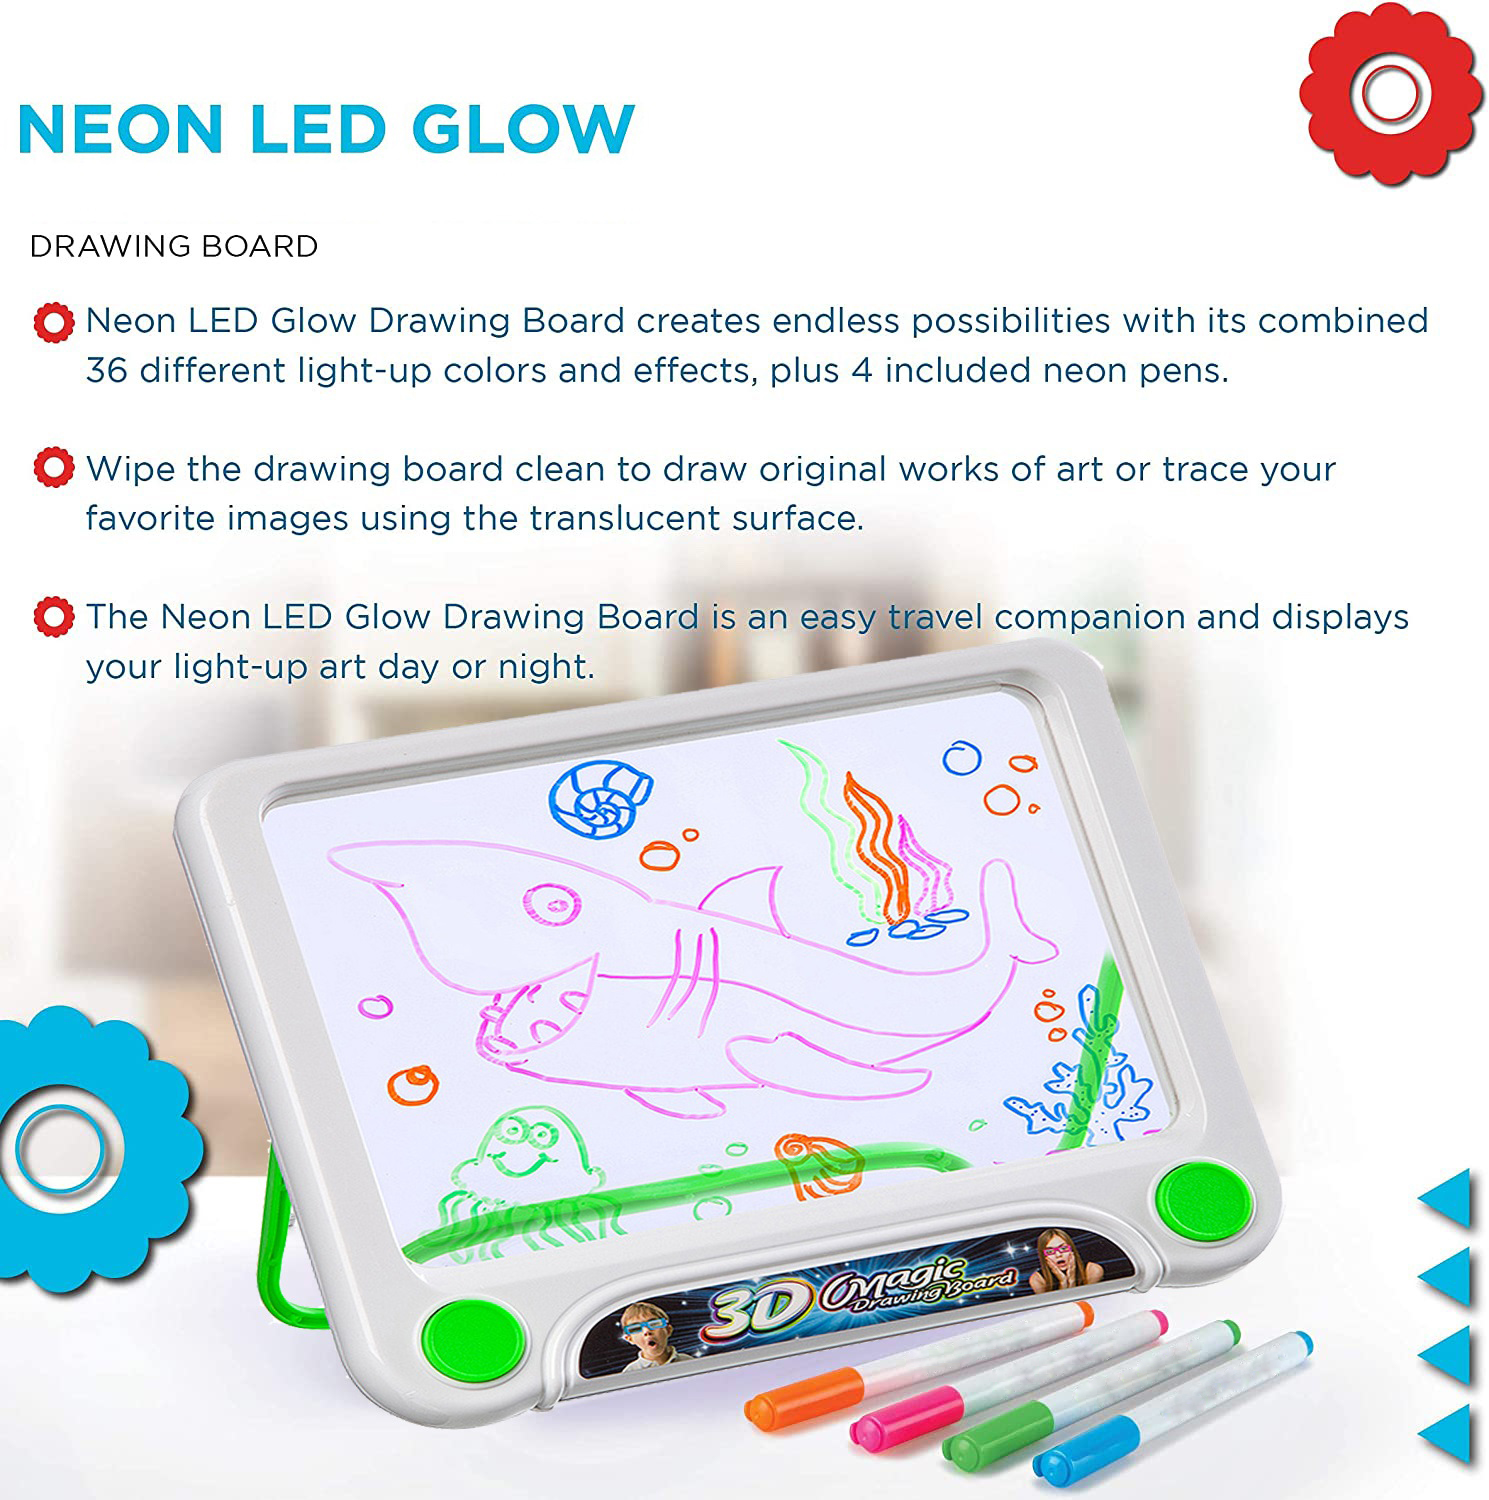 Electronic-Learning-LED-Glow-Drawing-Board-Kids-Doodle-Board-Set-Interactive-Handwriting-Writing-Drawing-Pad-with-4-Fluorescent-Markers-3D-Glasses-for-Girls-Boys-44